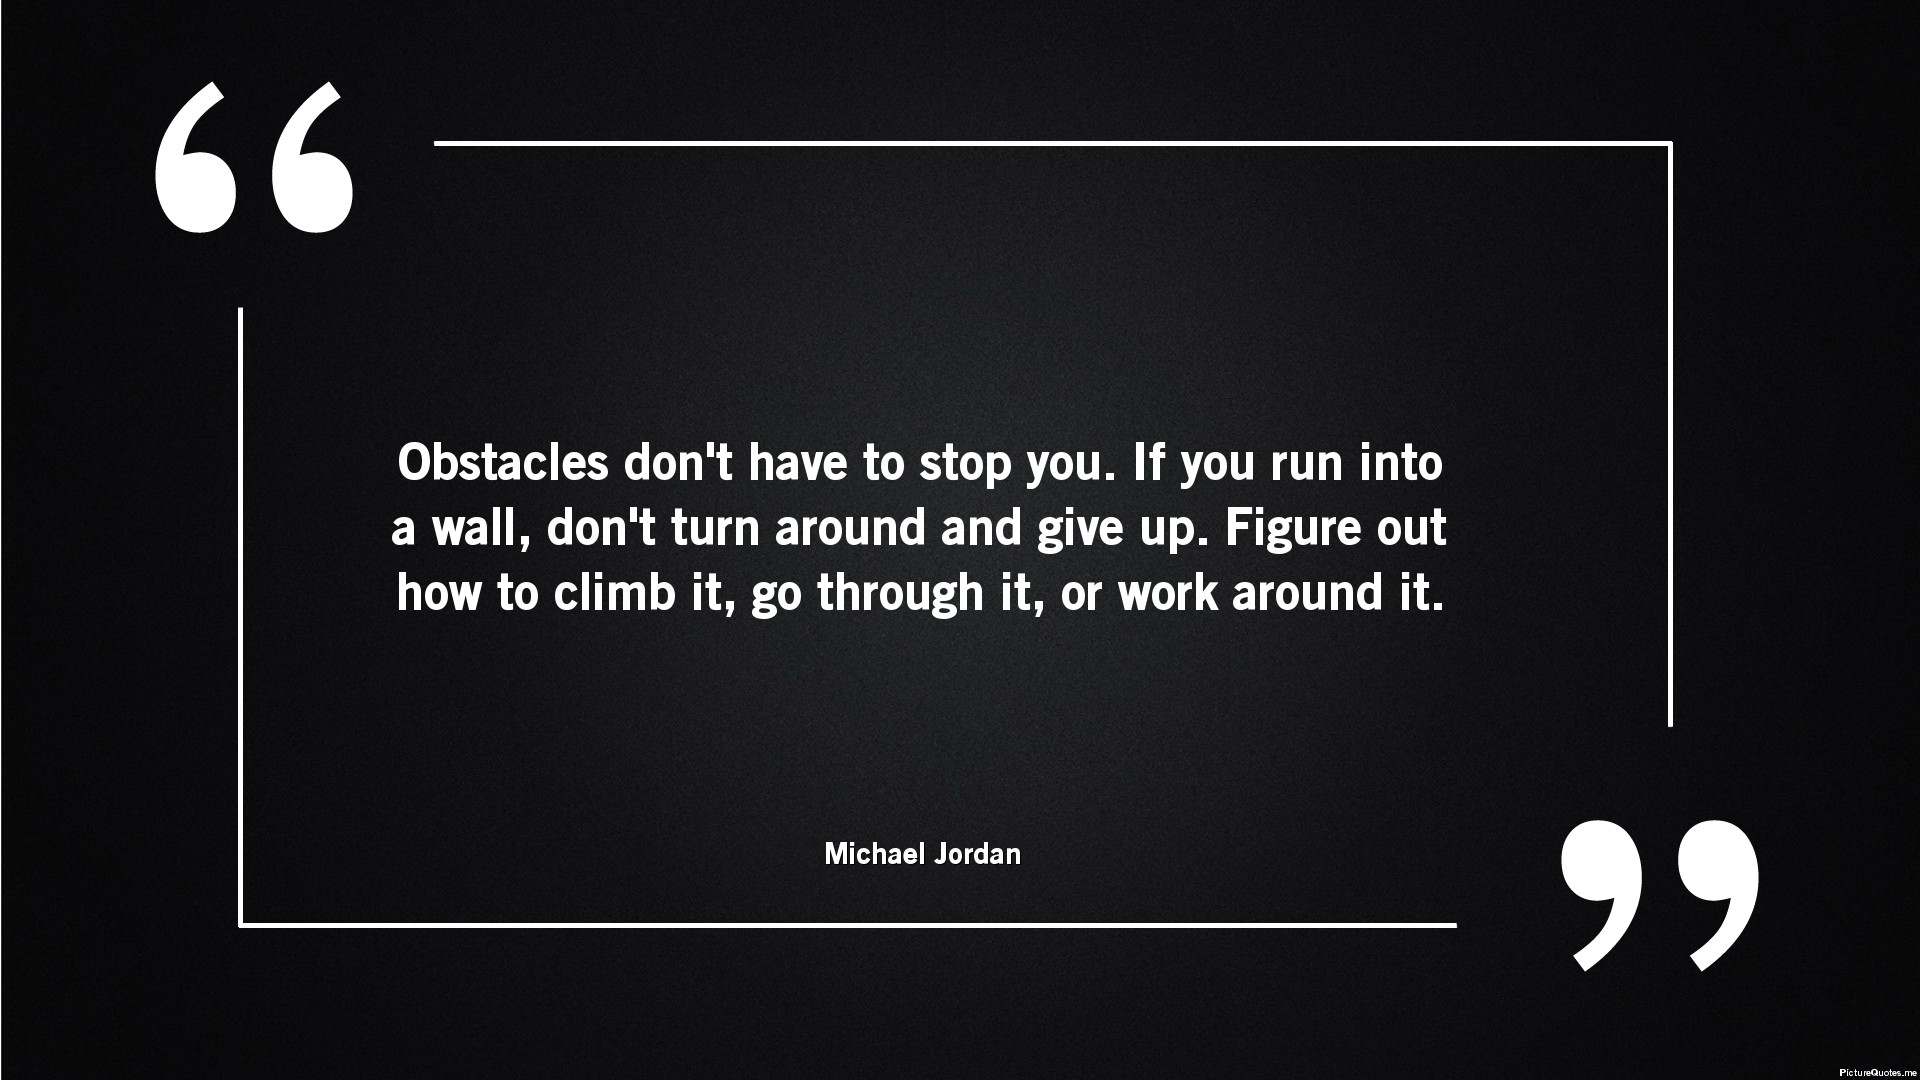 1920x1080 Tags: Inspirational Work Obstacles  px. << prev Michael Jordan  quote